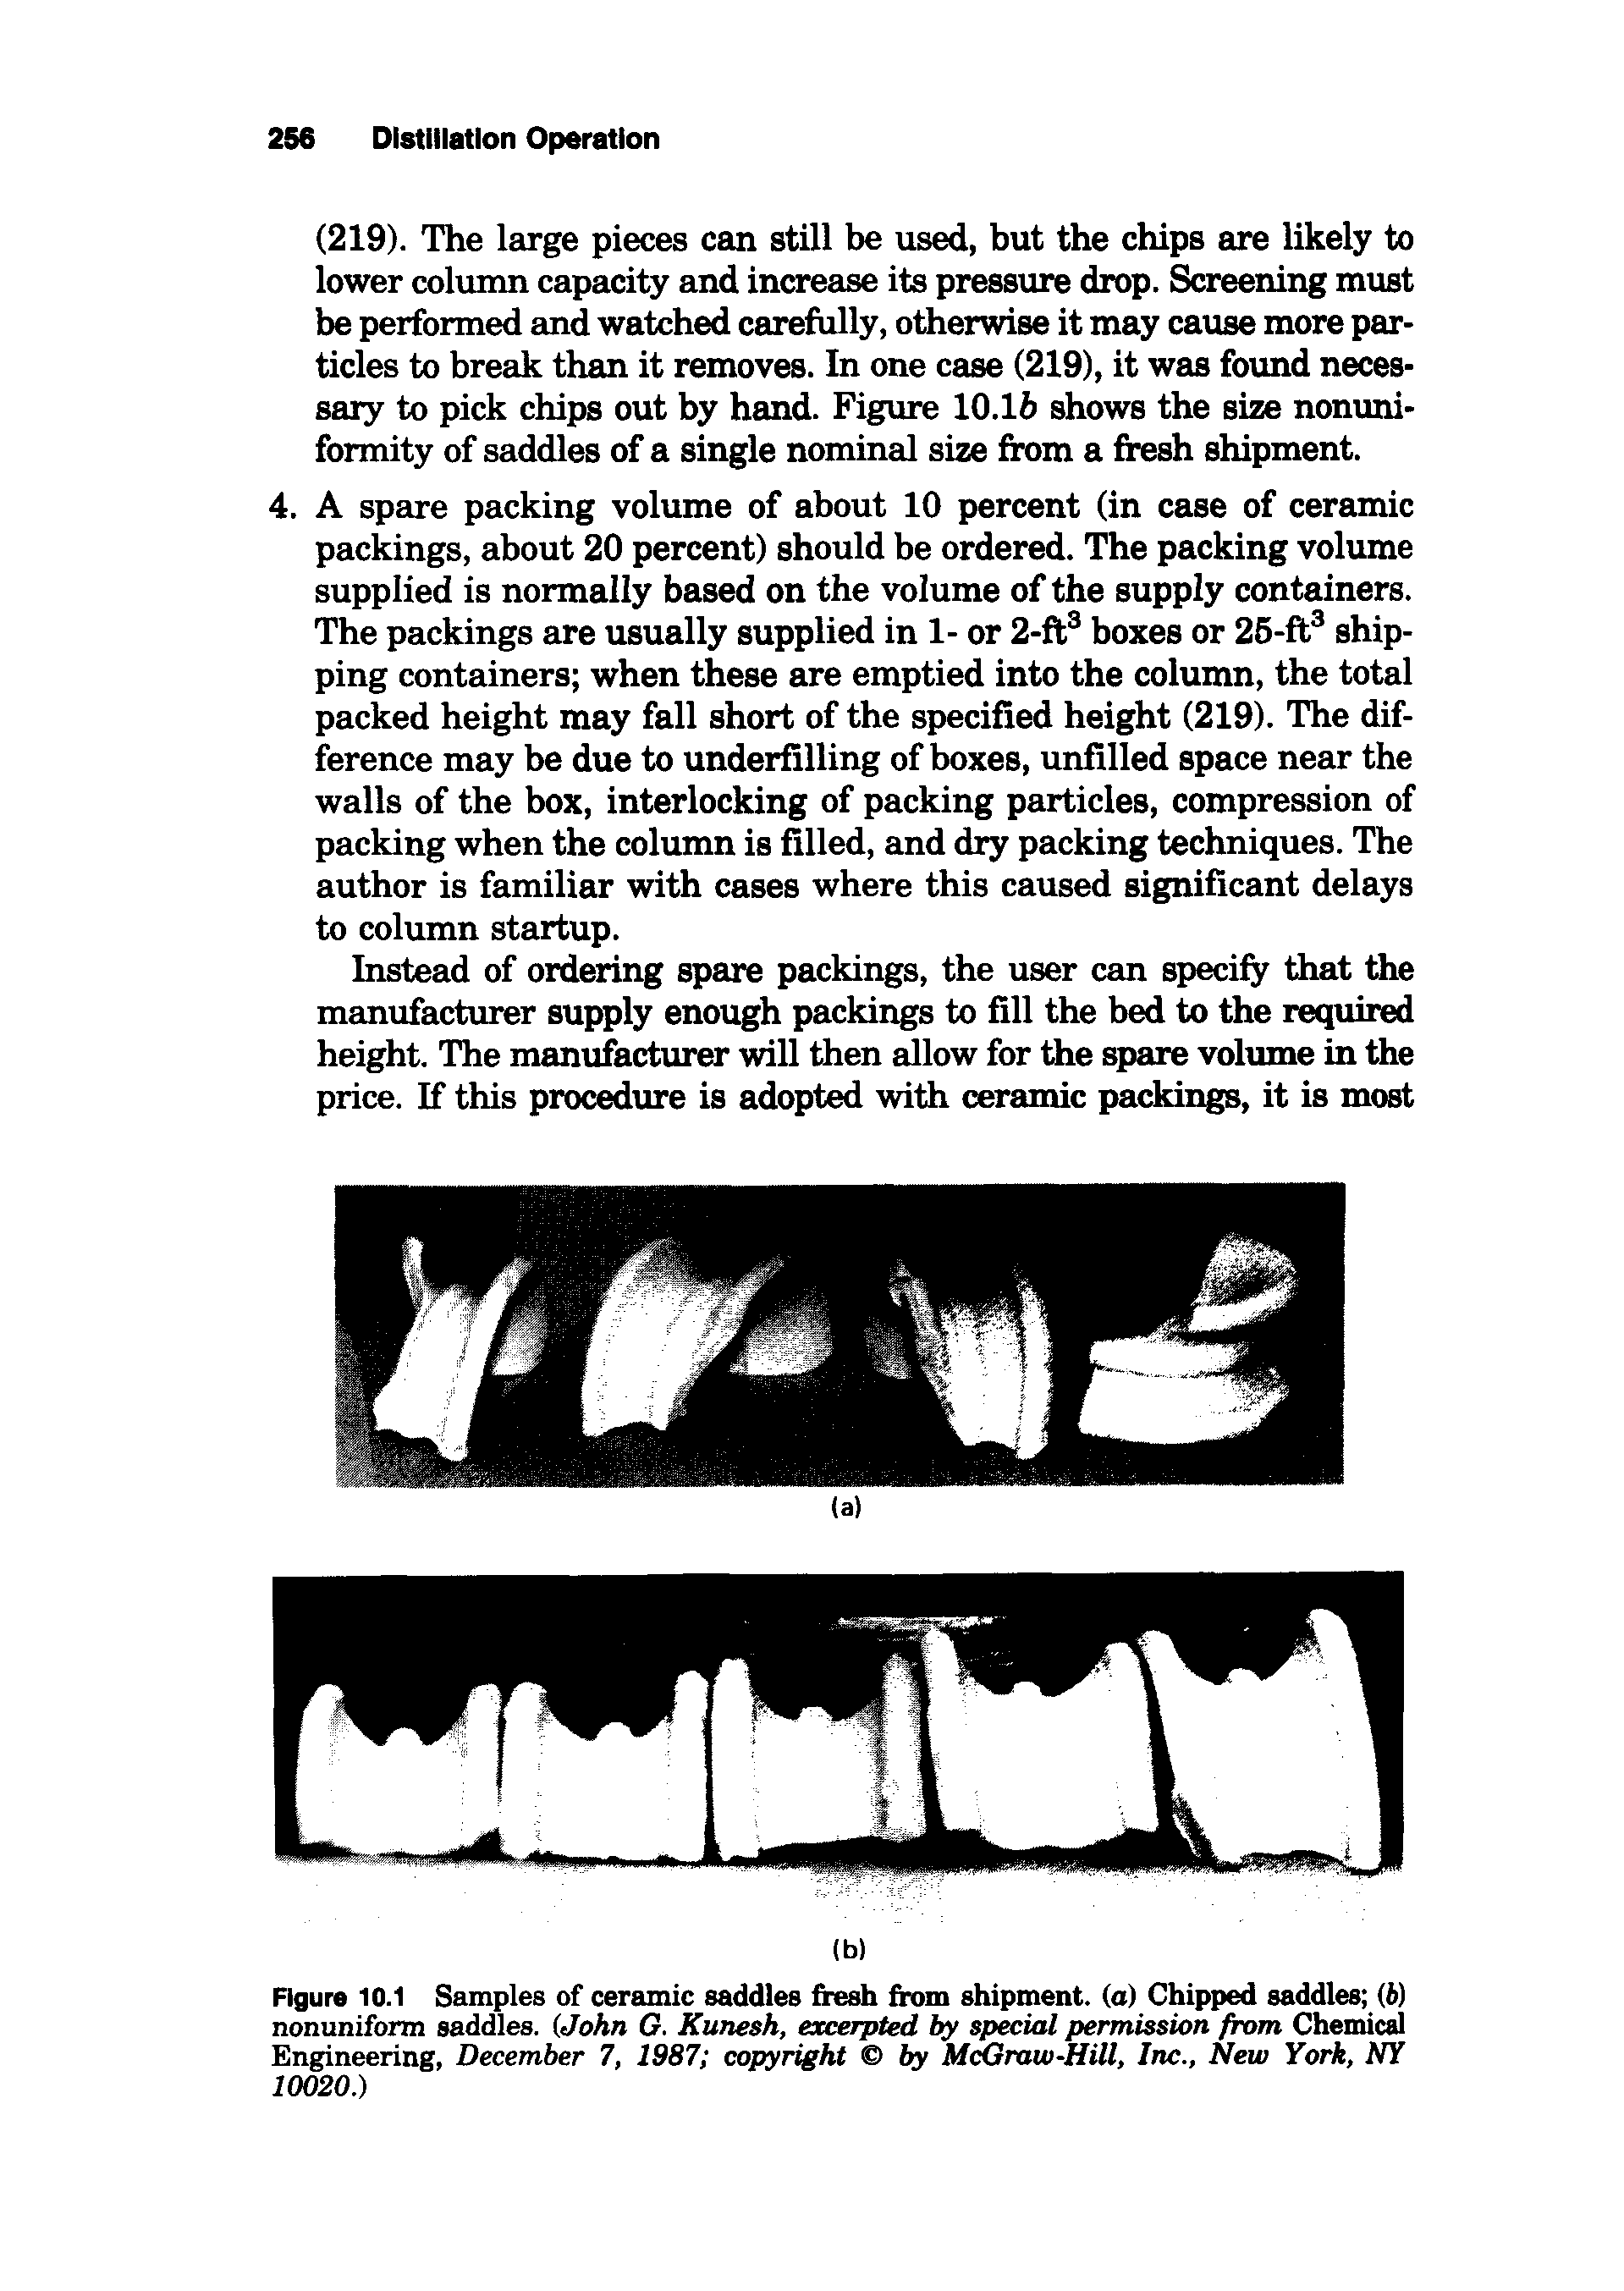 Figure 10.1 Samples of ceramic saddles fresh from shipment, (a) Chipped saddles (6) nonuniform saddles. (John G. Kunesh, excerpted by special permission from Chemical Engineering, December 7, 1987 copyright by McGraw-Hill, Inc., New York, NY 10020.)...